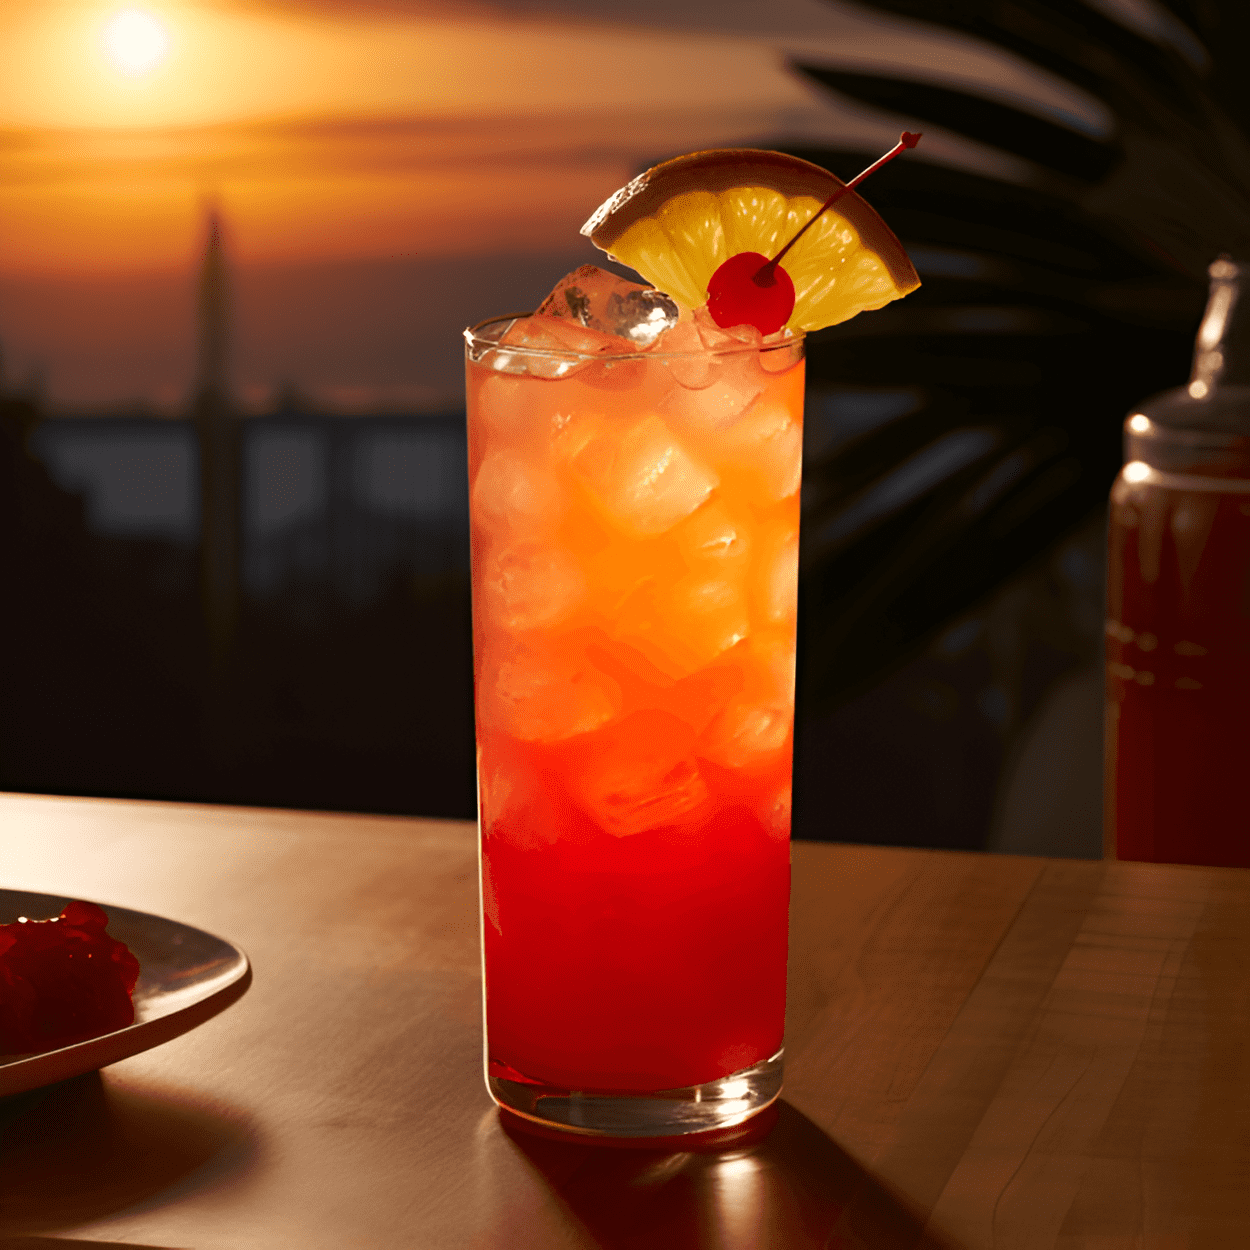 Malibu Sunrise Cocktail Recipe - The Malibu Sunrise is a sweet, fruity cocktail with a strong coconut flavor from the Malibu rum. The tropical taste is complemented by the tartness of the pineapple juice and the sweetness of the grenadine, creating a balanced and refreshing drink.